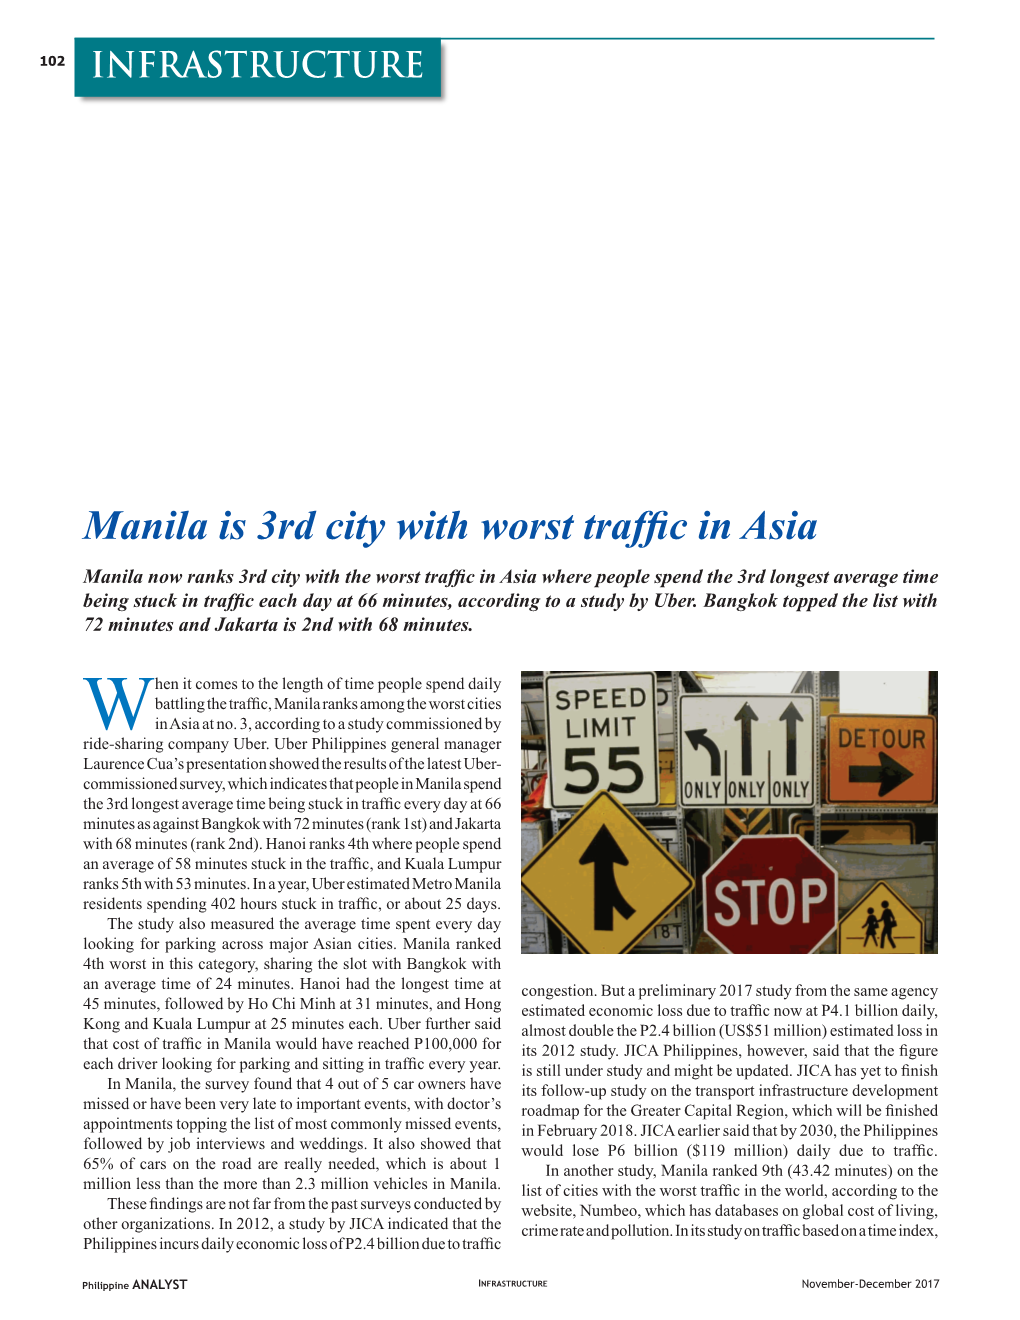 Manila Is 3Rd City with Worst Traffic in Asia